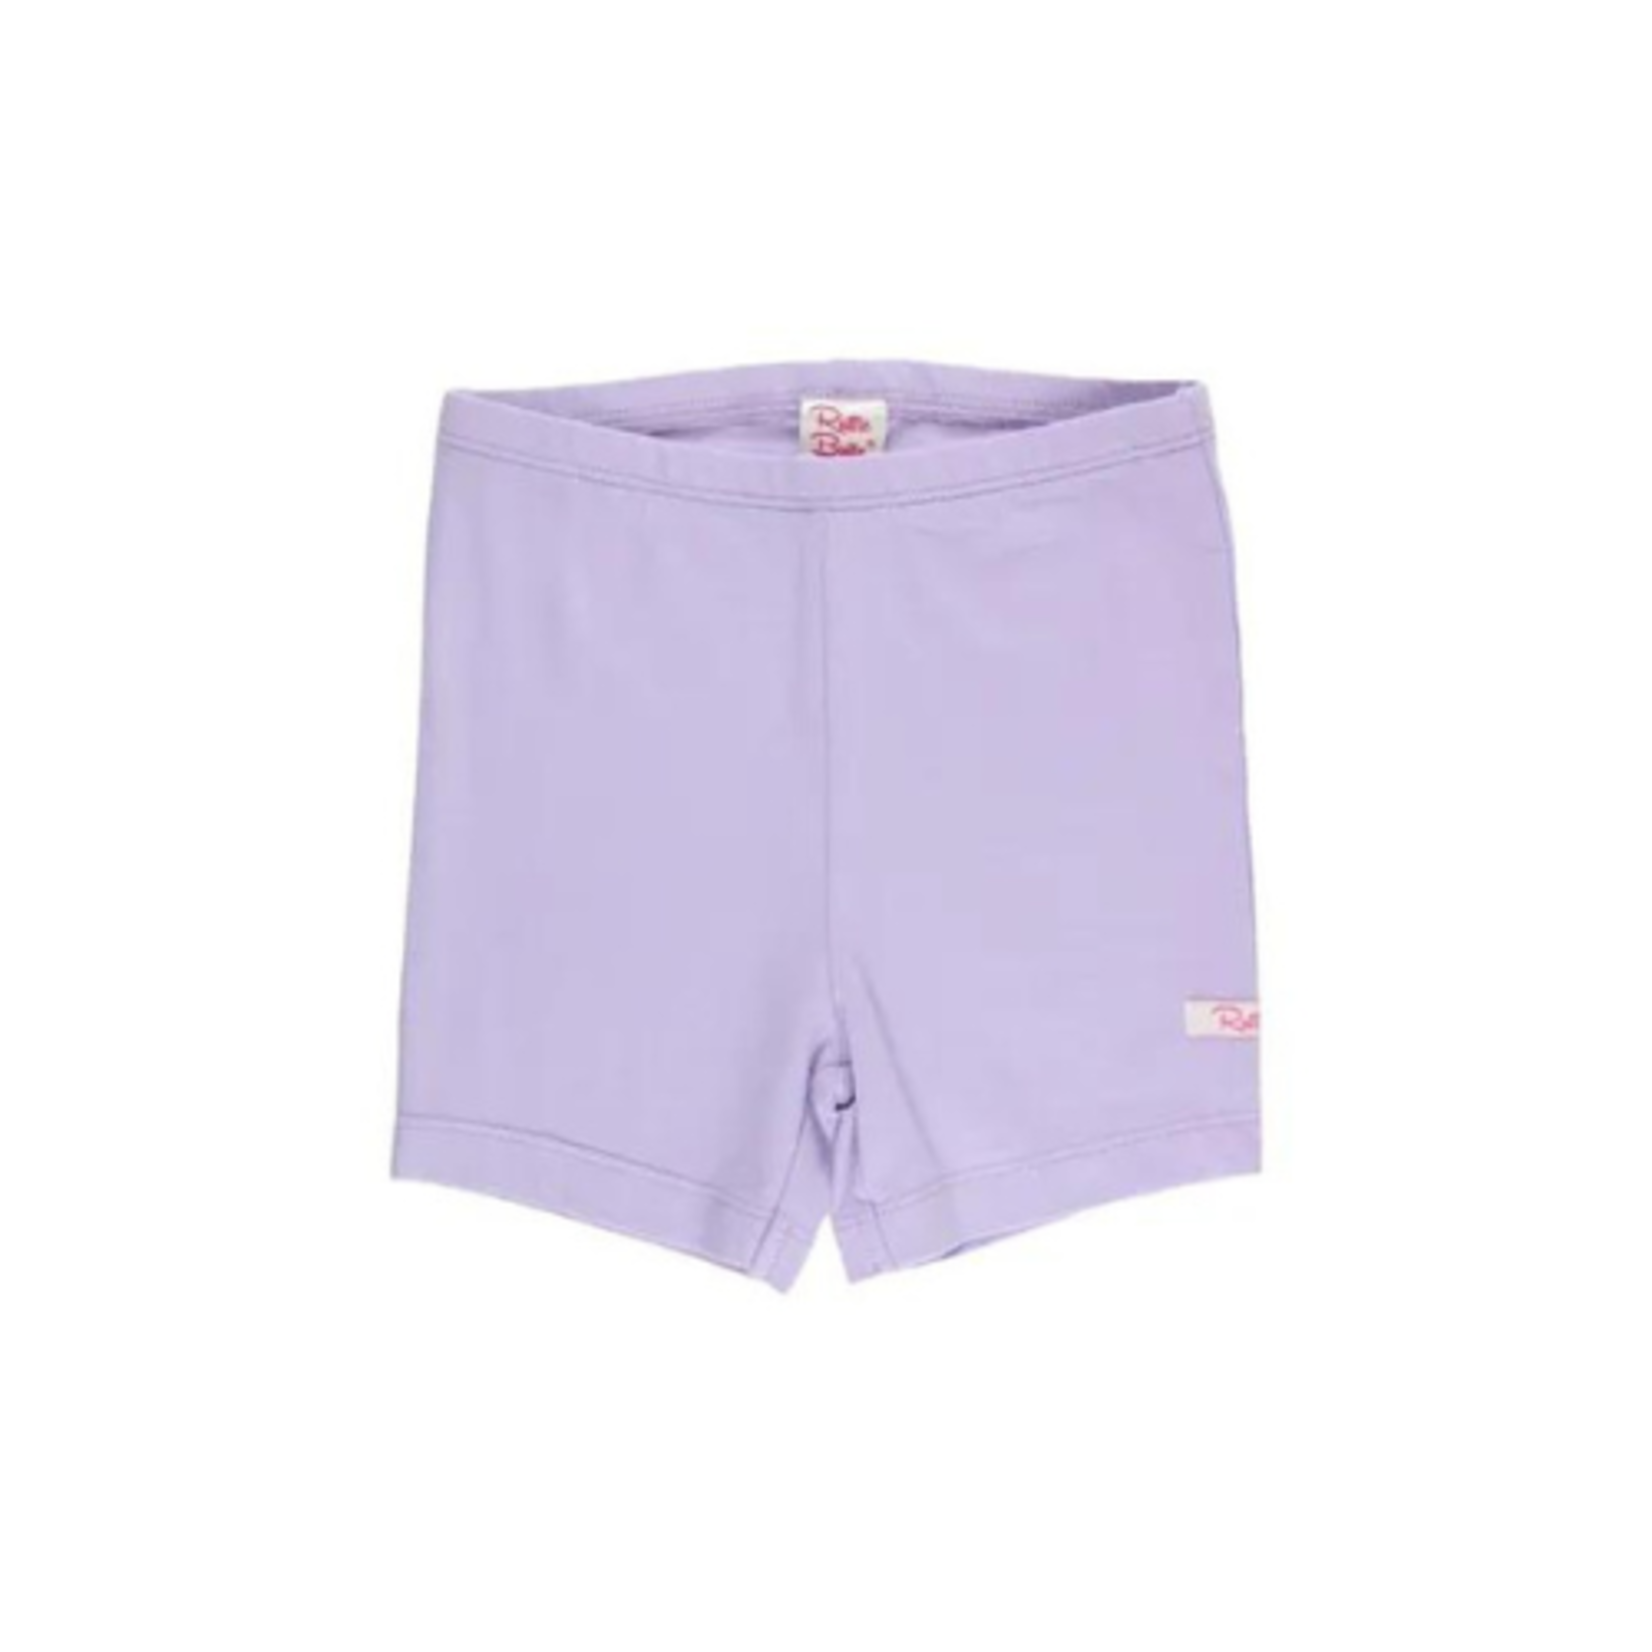 Rugged Butts Knit Playground Shorts